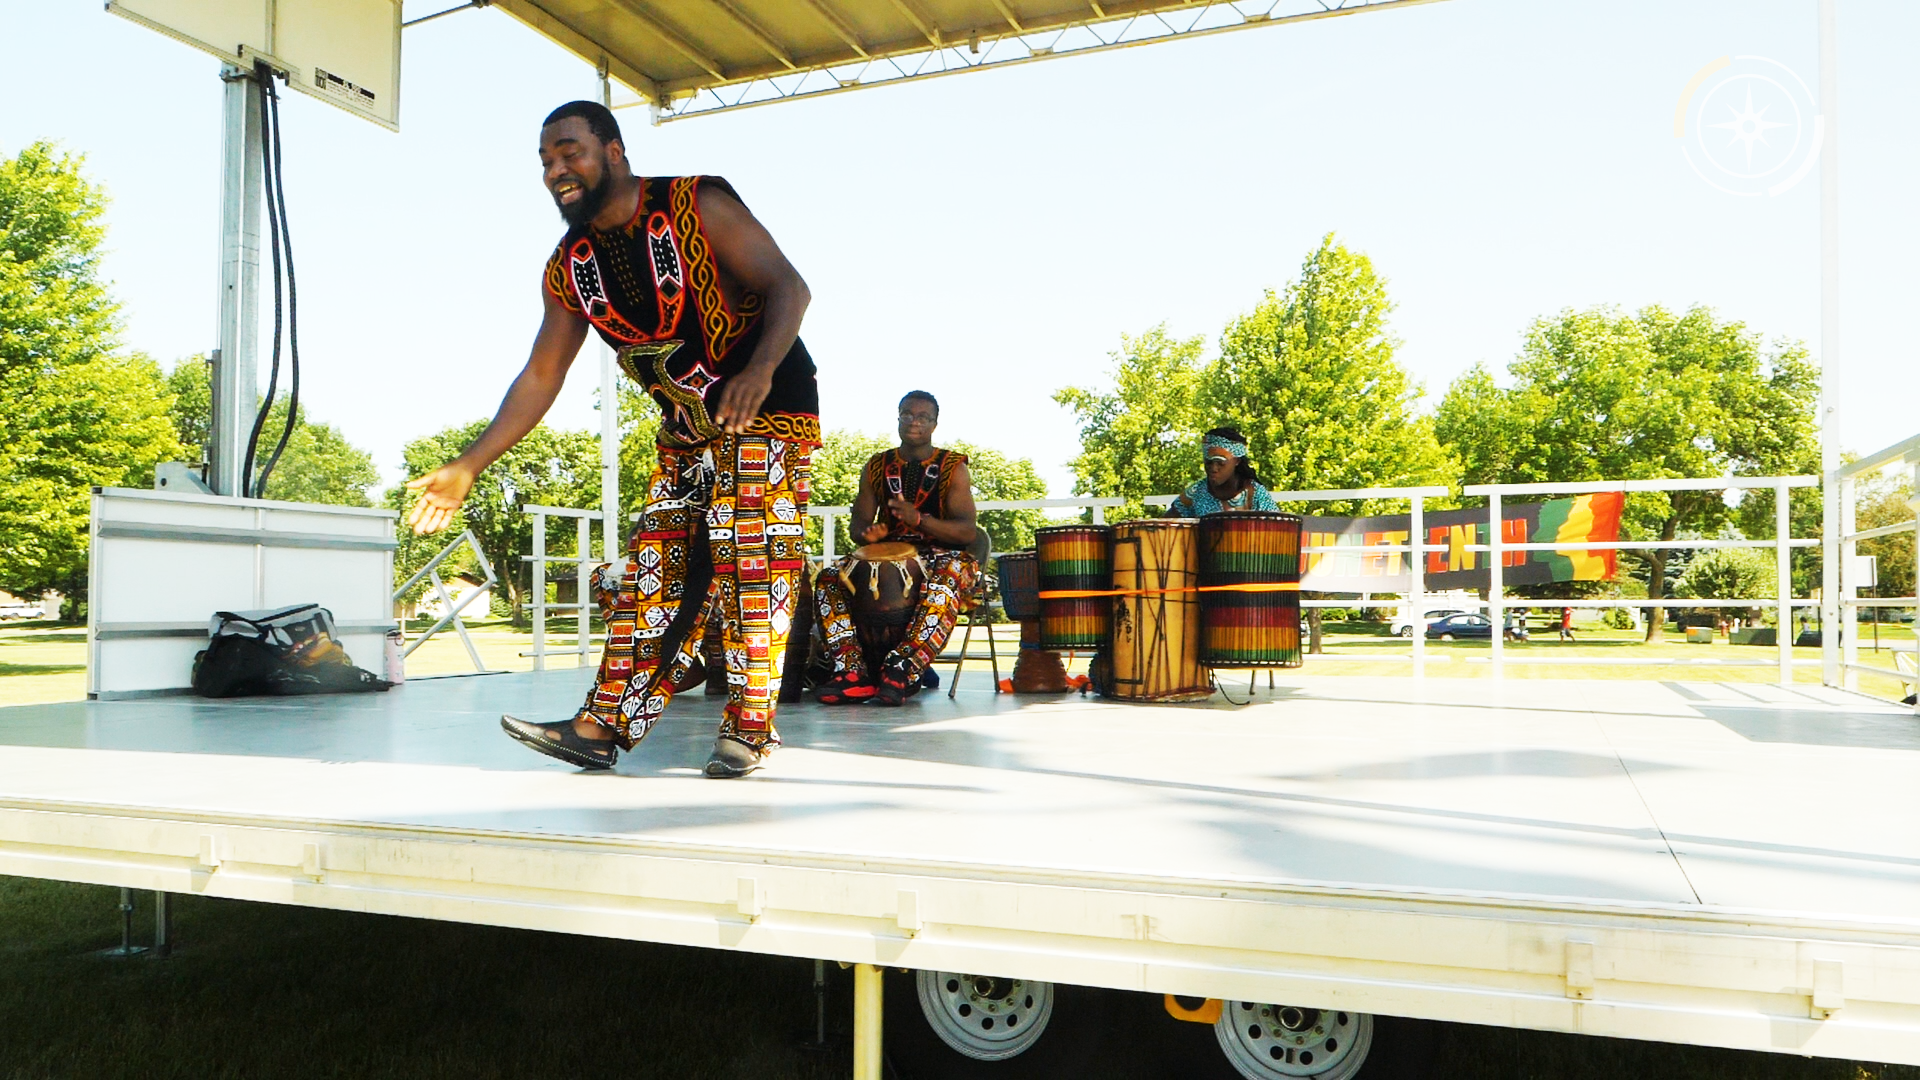 Christian Adeti from the Titambe West African Dance Ensemble of Minnesota leads dancing in the park